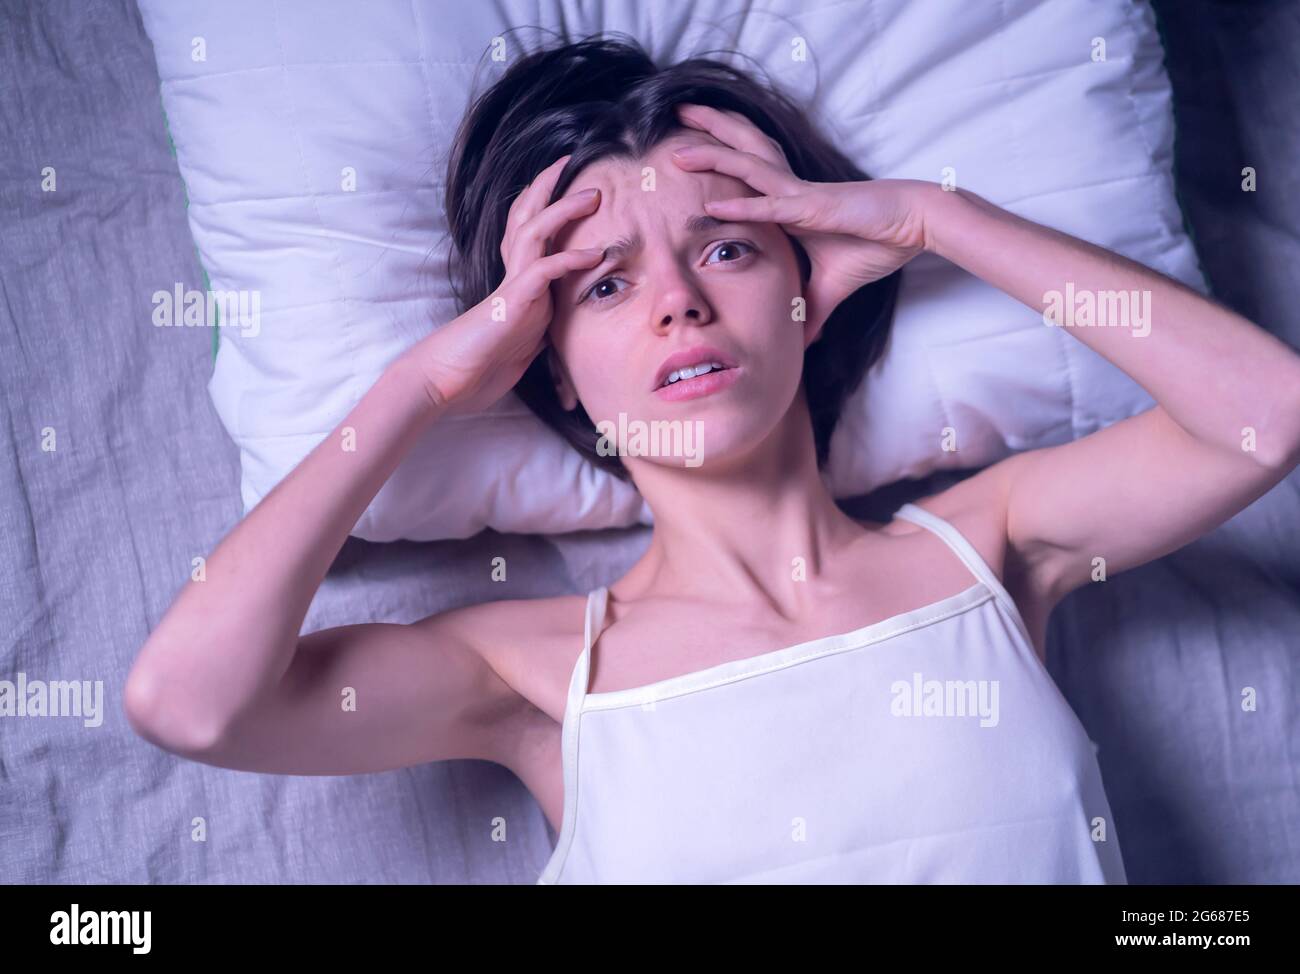 A tired woman has trouble sleeping, insomnia and headaches. Stock Photo